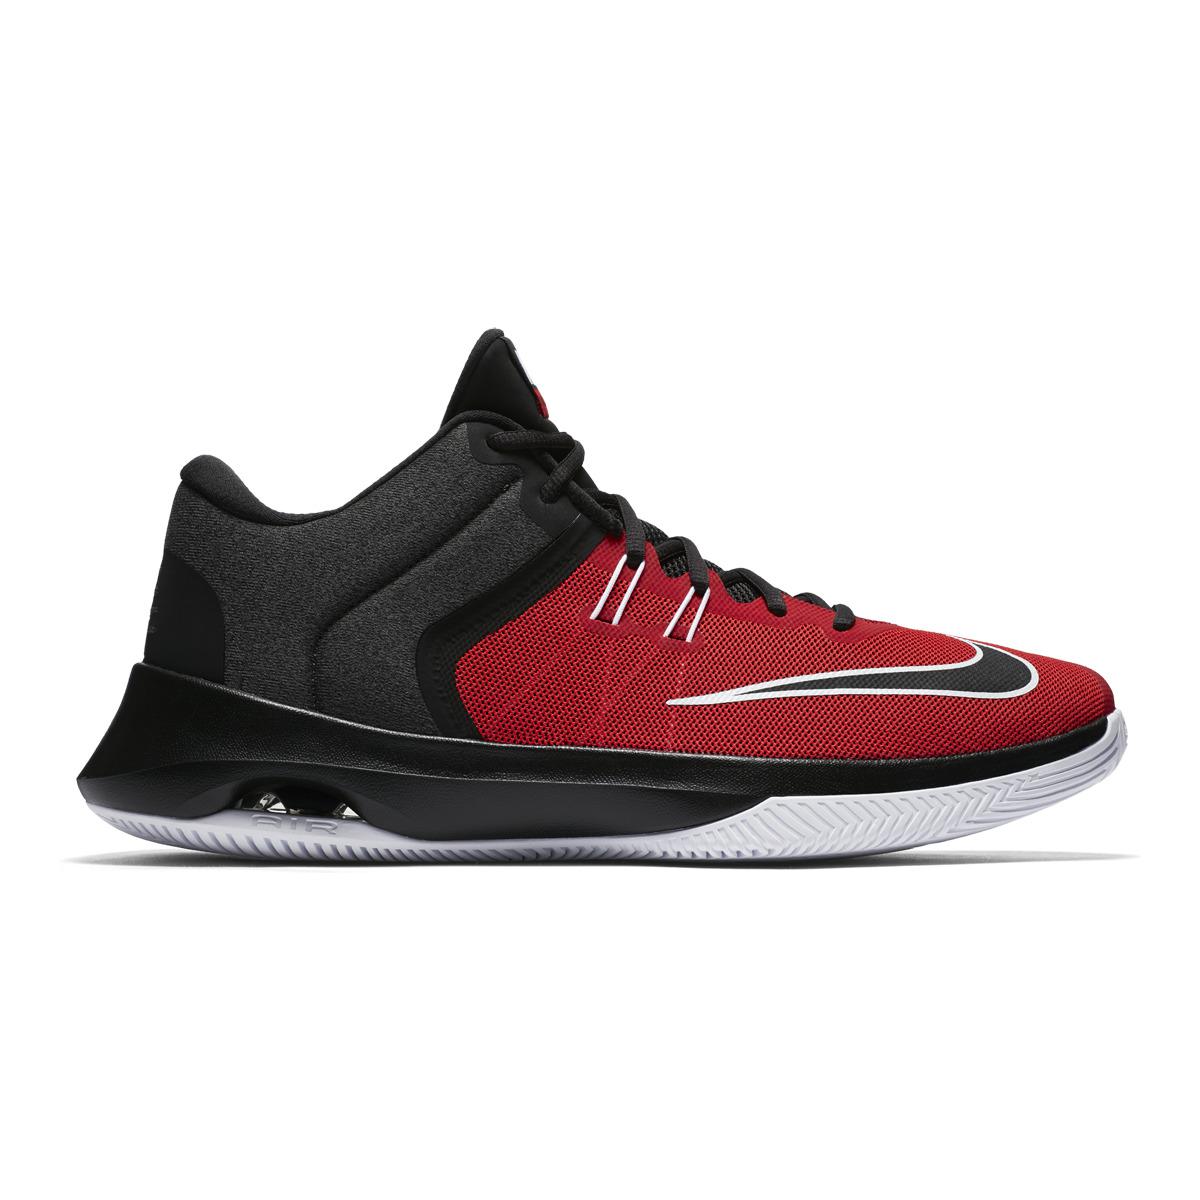 Lyst - Nike Air Versatile Ii Basketball Shoes in Red for Men